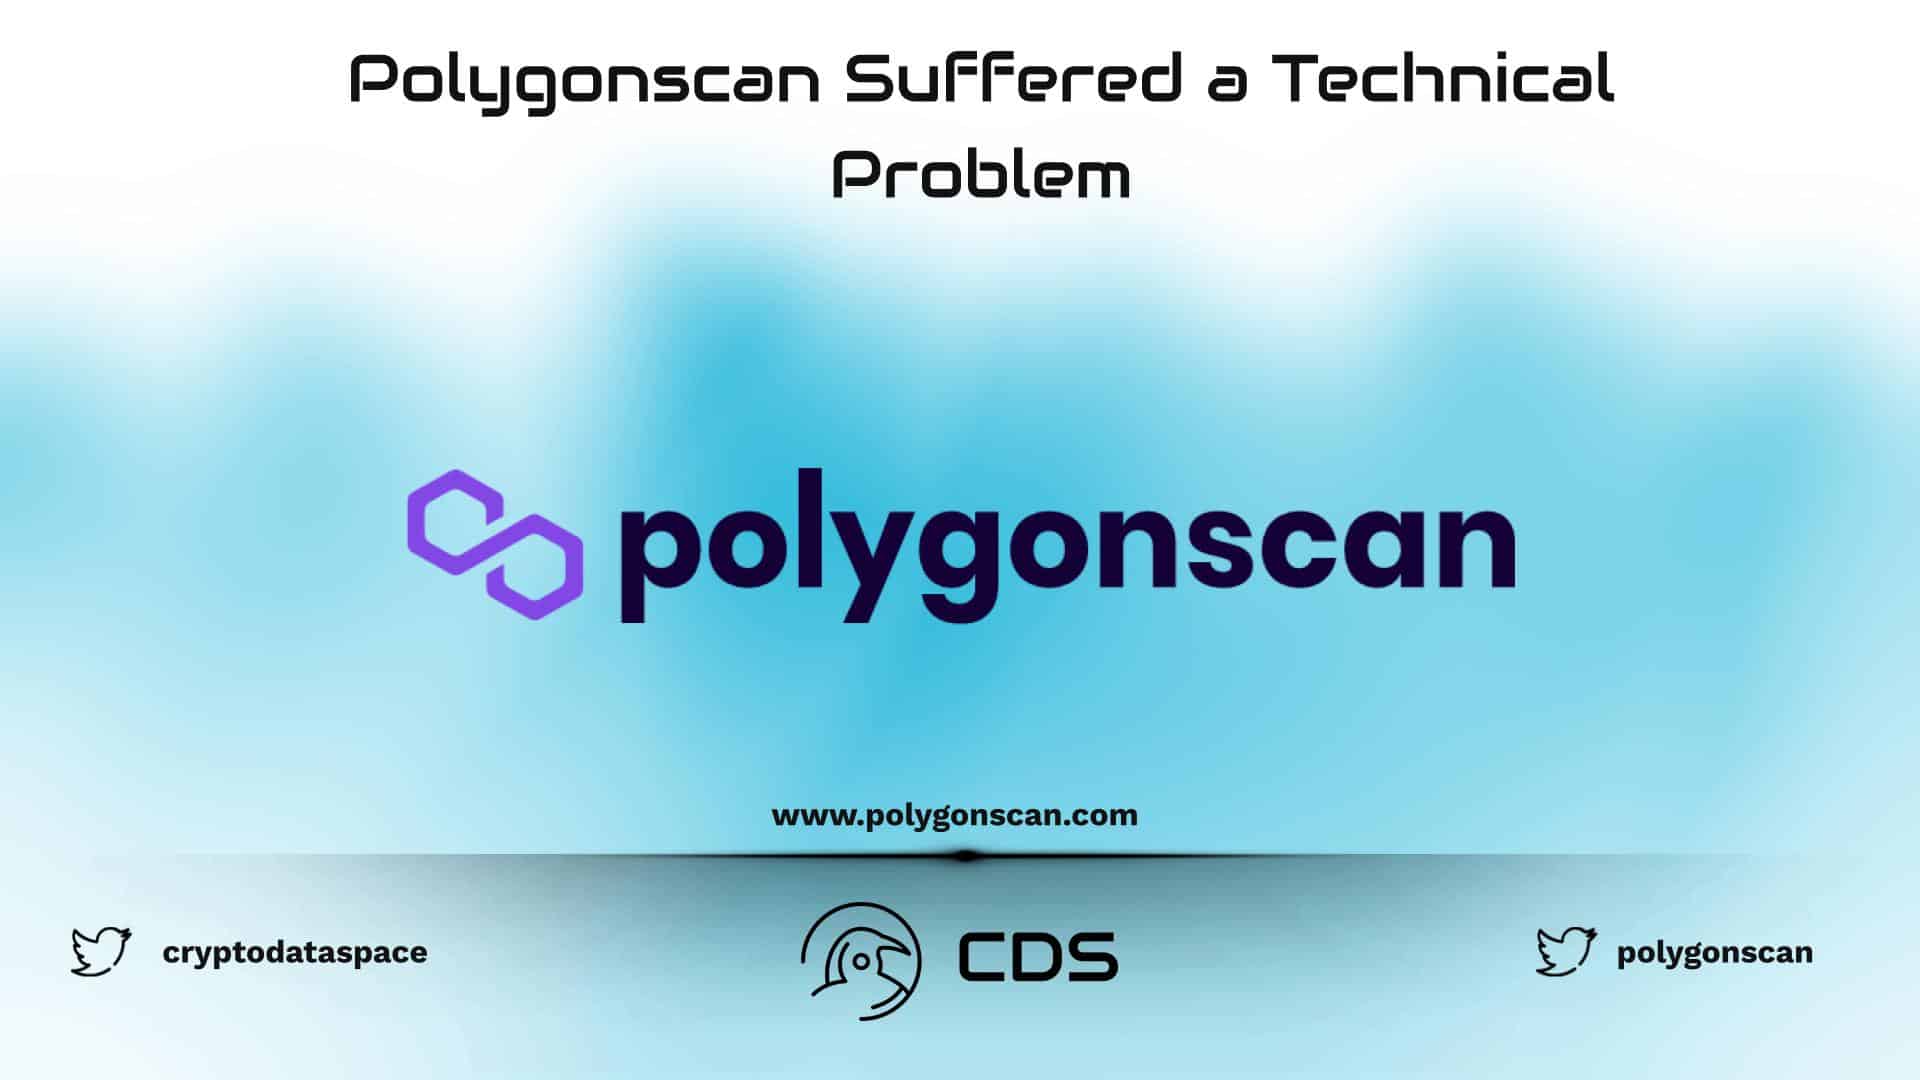 Polygonscan Suffered a Technical Problem